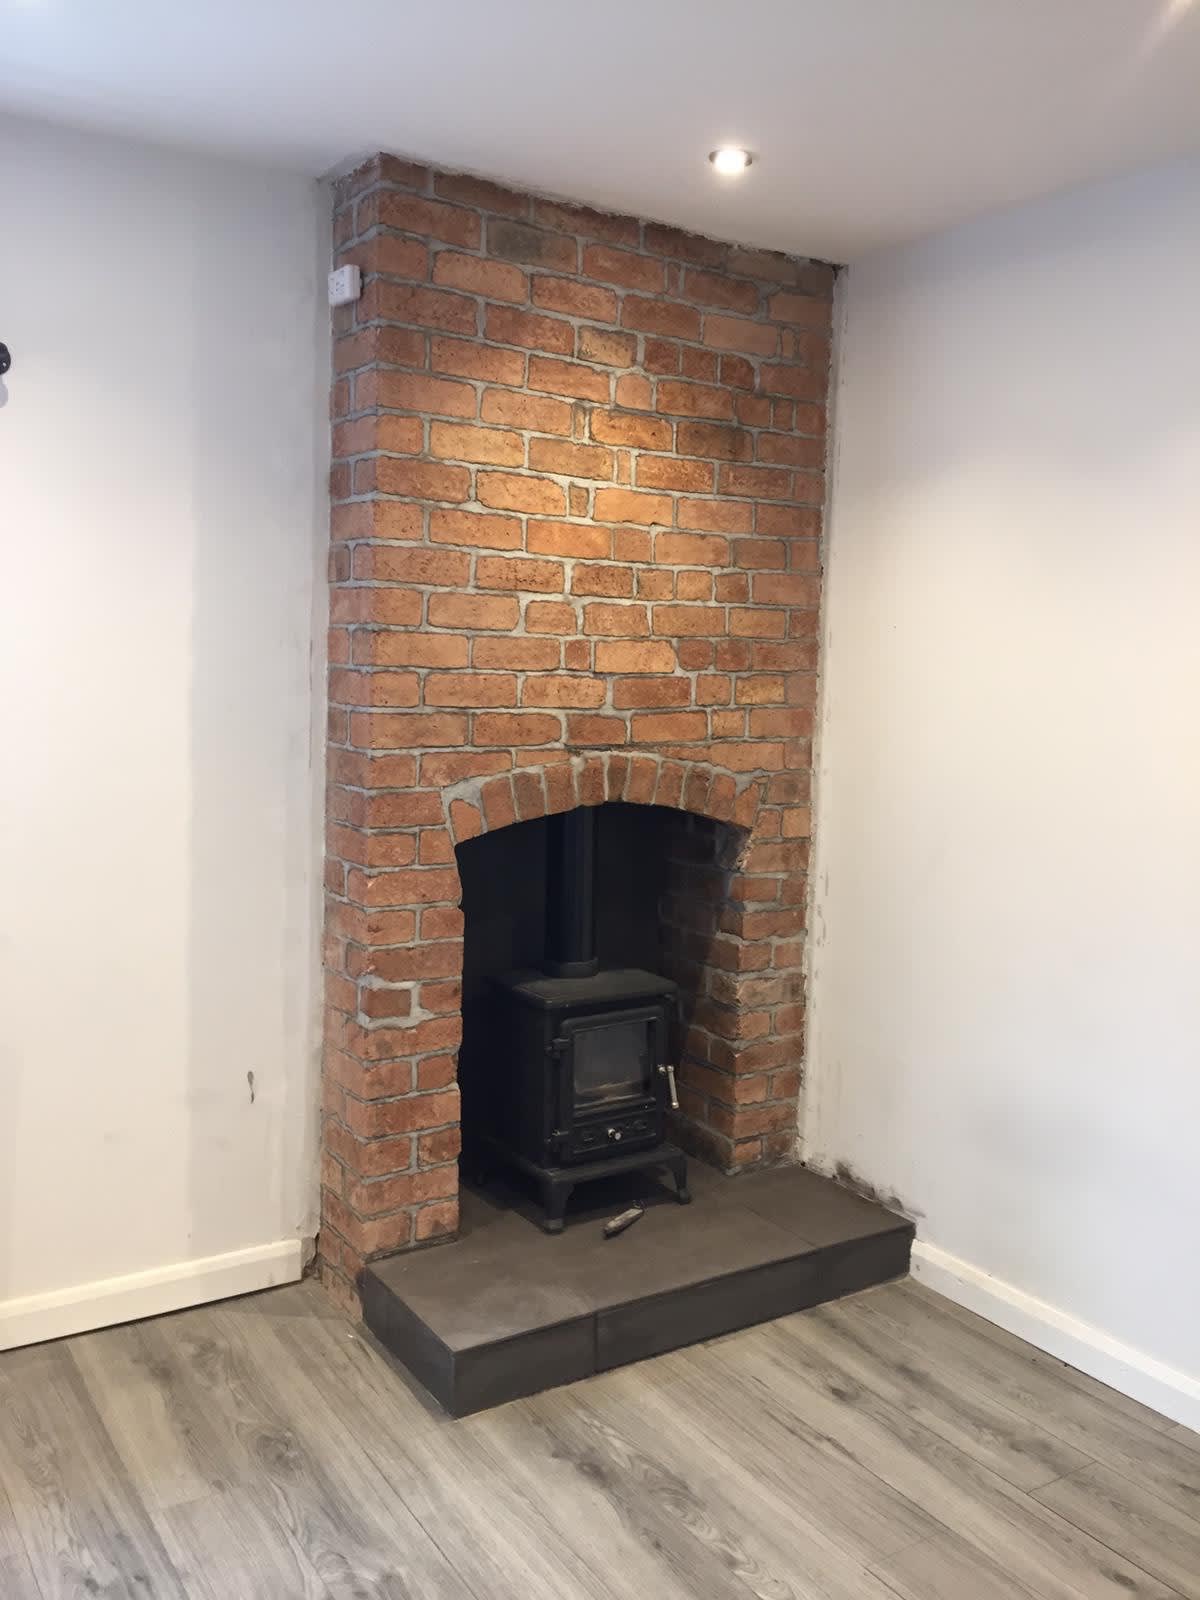 Chimney Sweep Fireplaces & Stoves Stoke-On-Trent 07415 283865